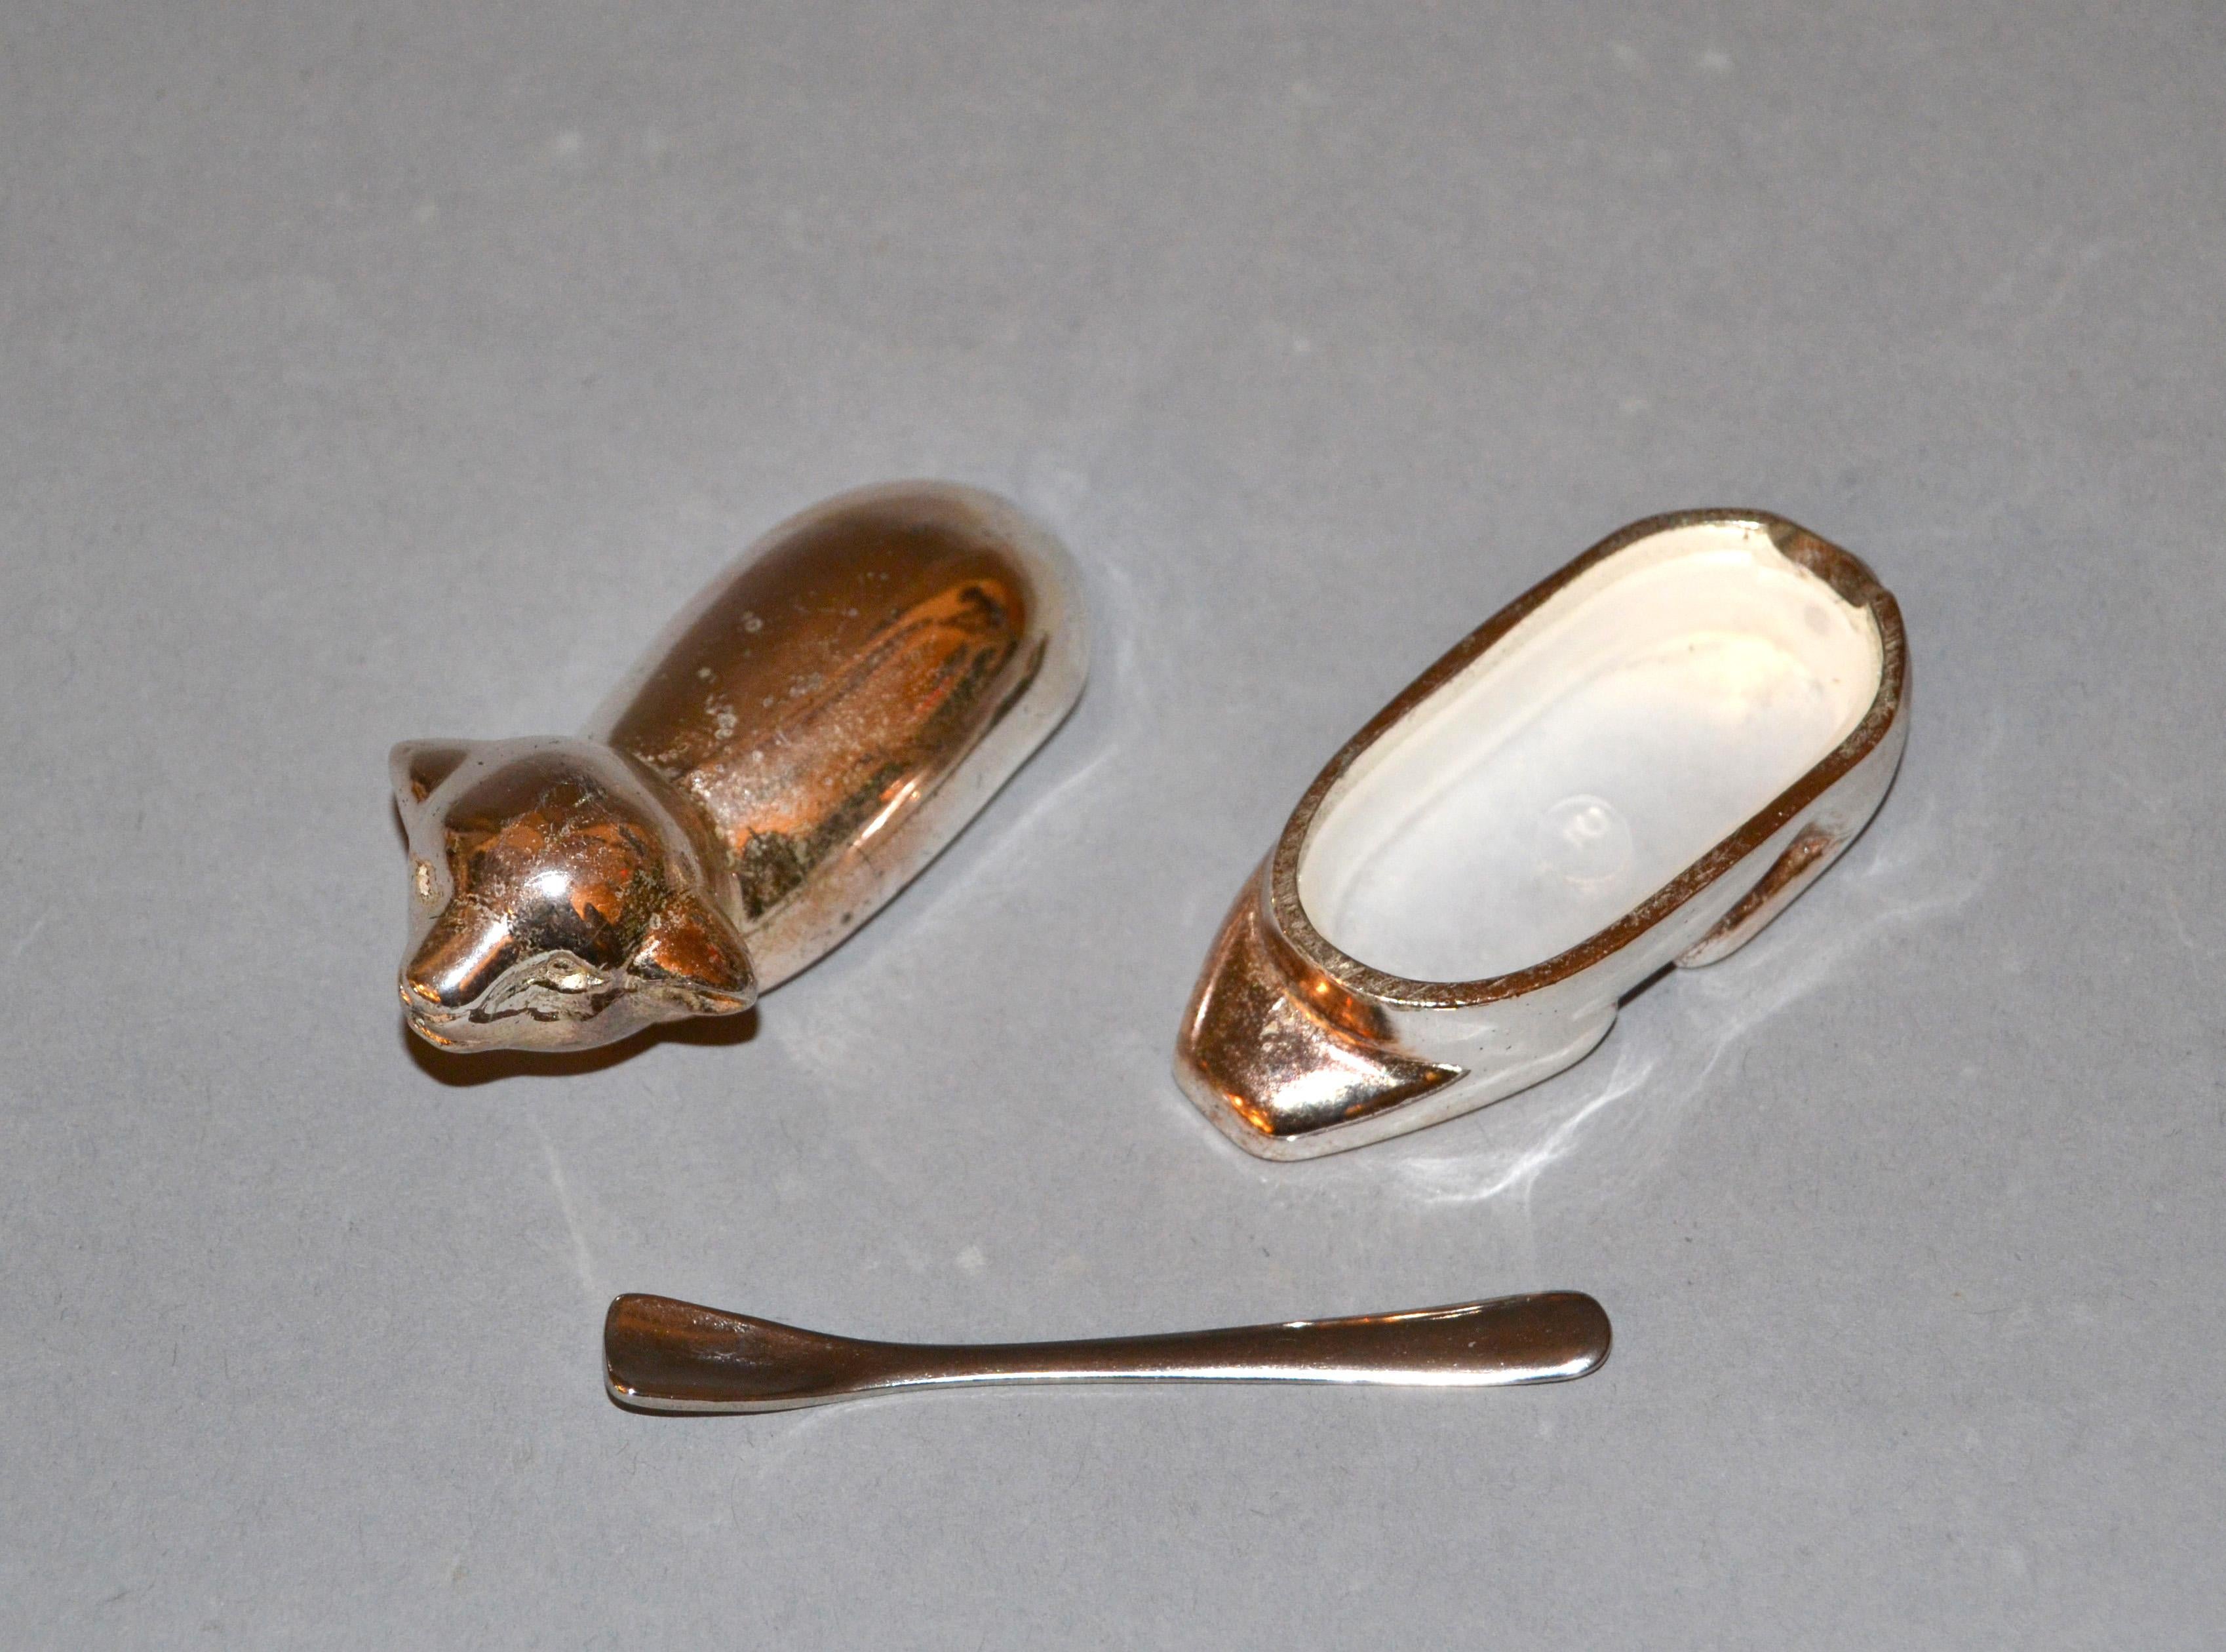 tableware hammered bottom dish with glass trays Table set 1960s salt and pepper set mini spoons